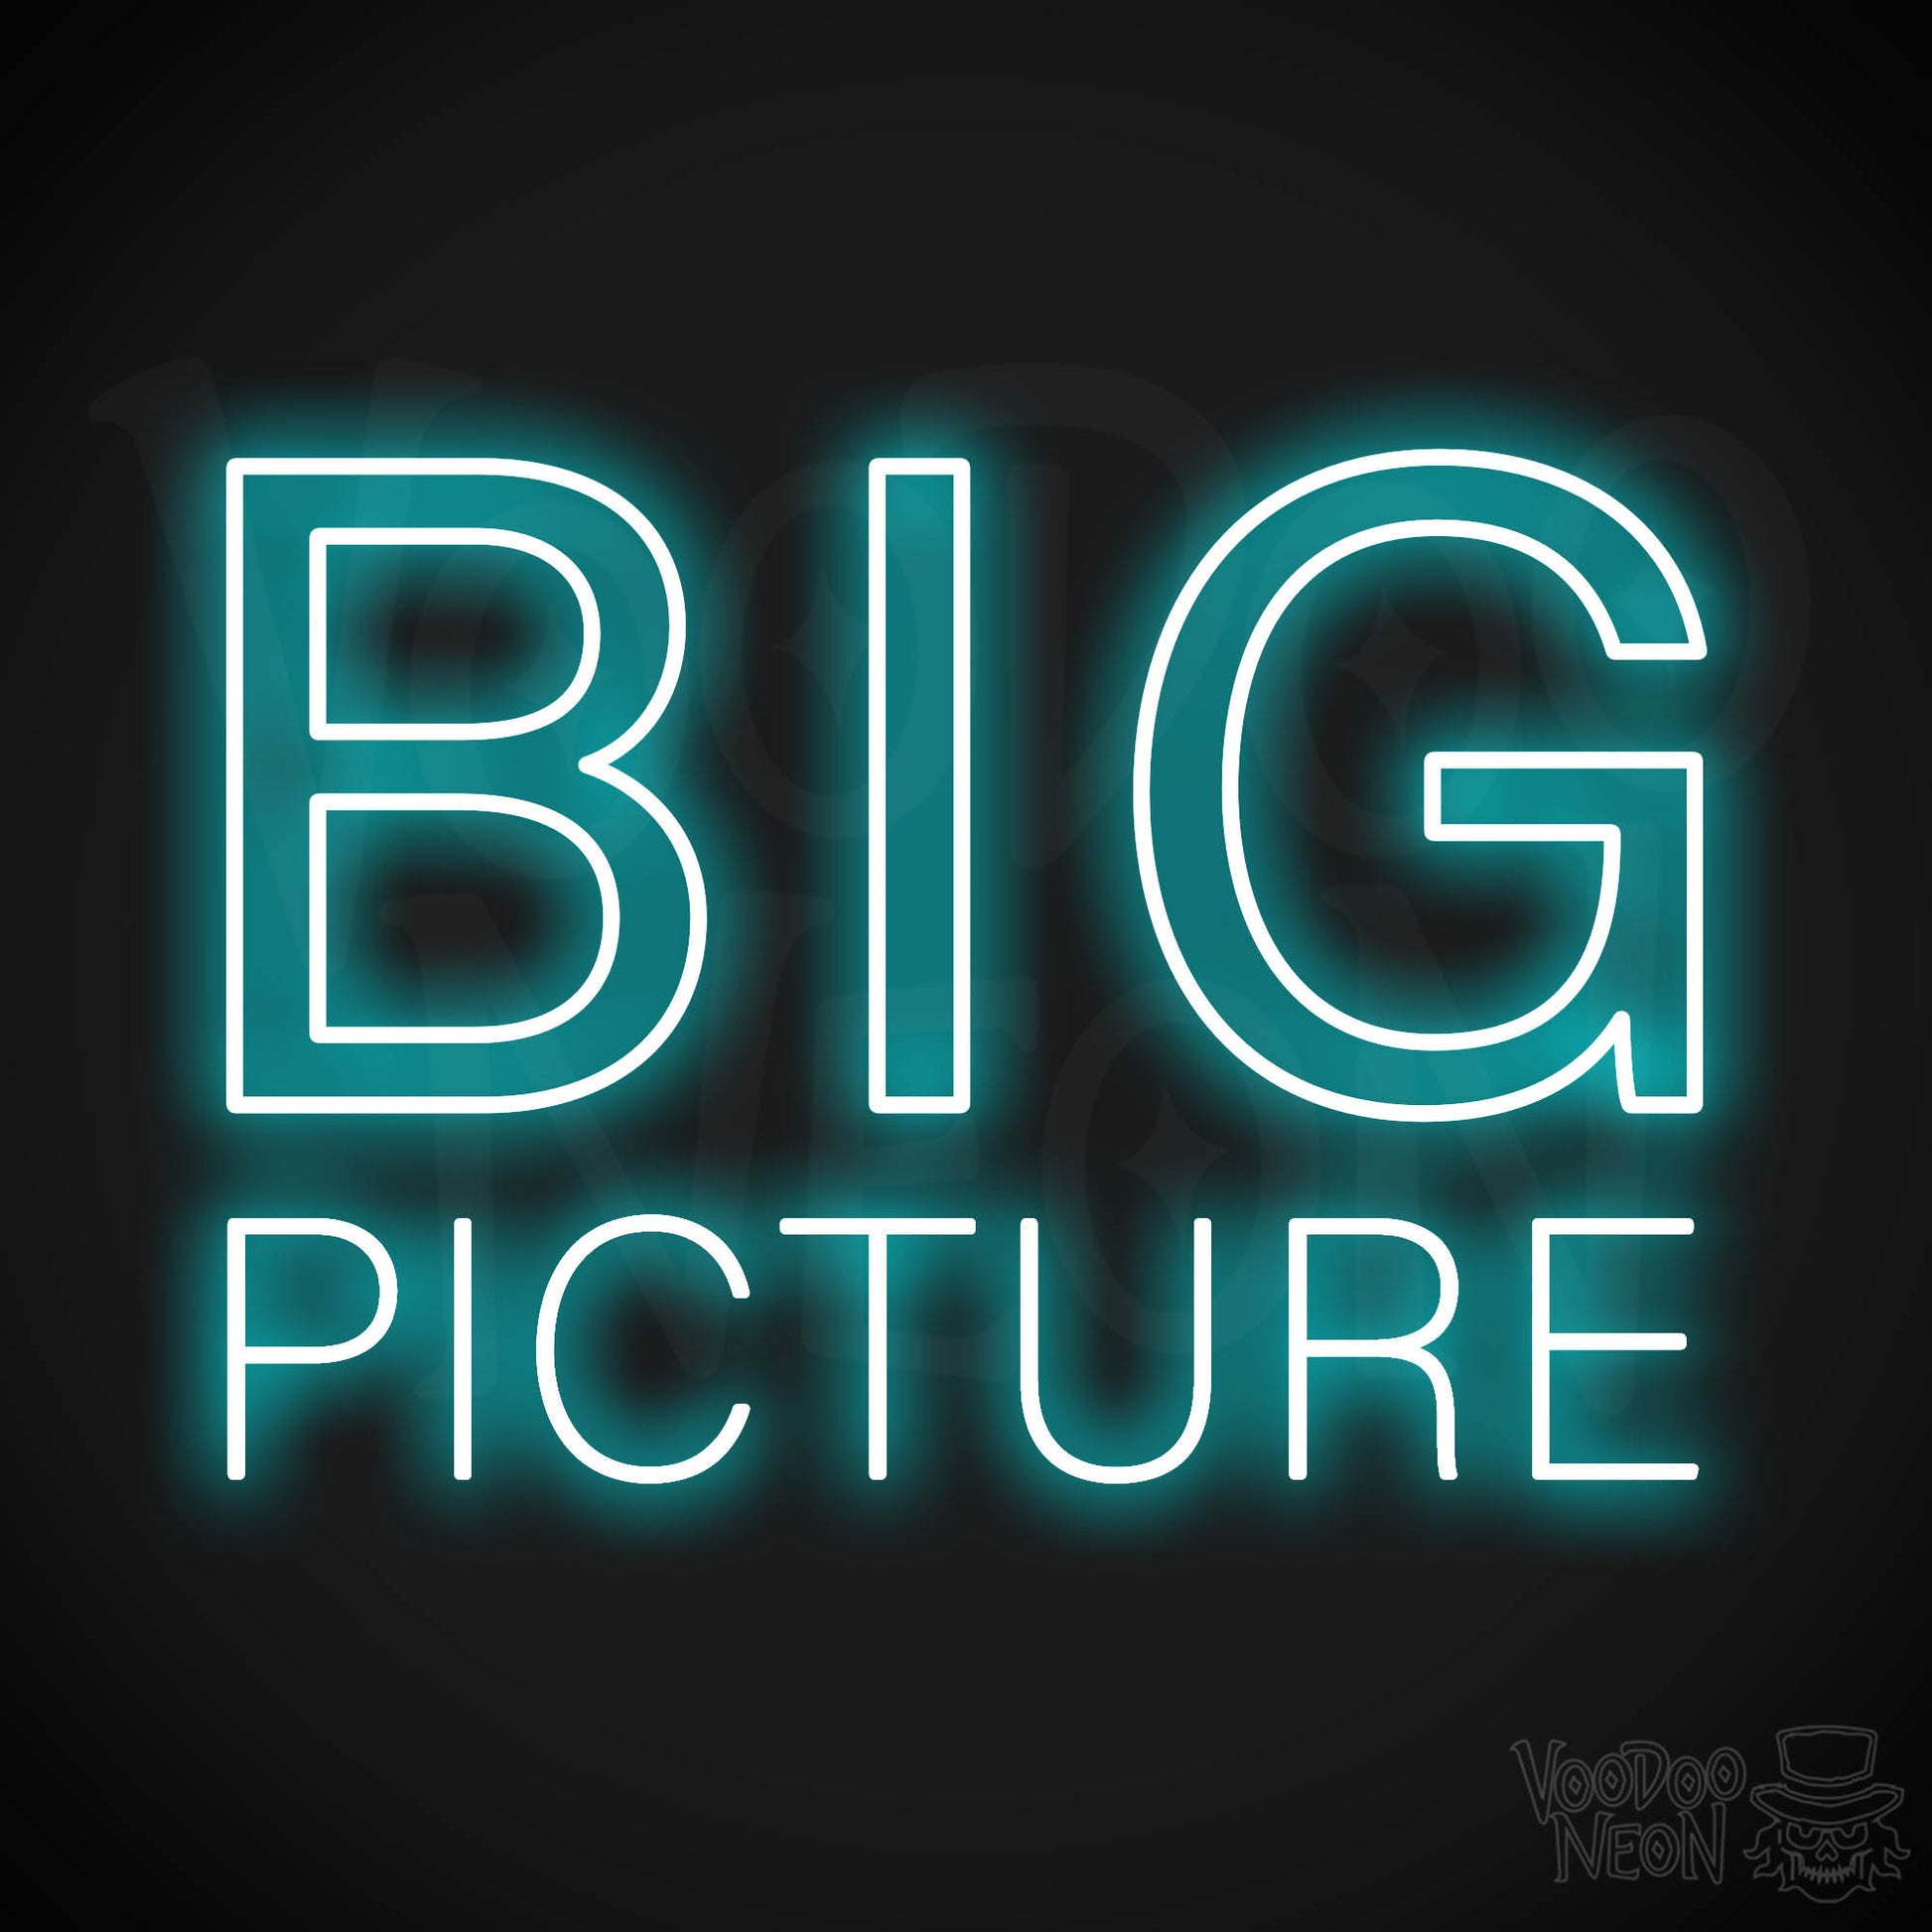 Big Picture LED Neon - Ice Blue